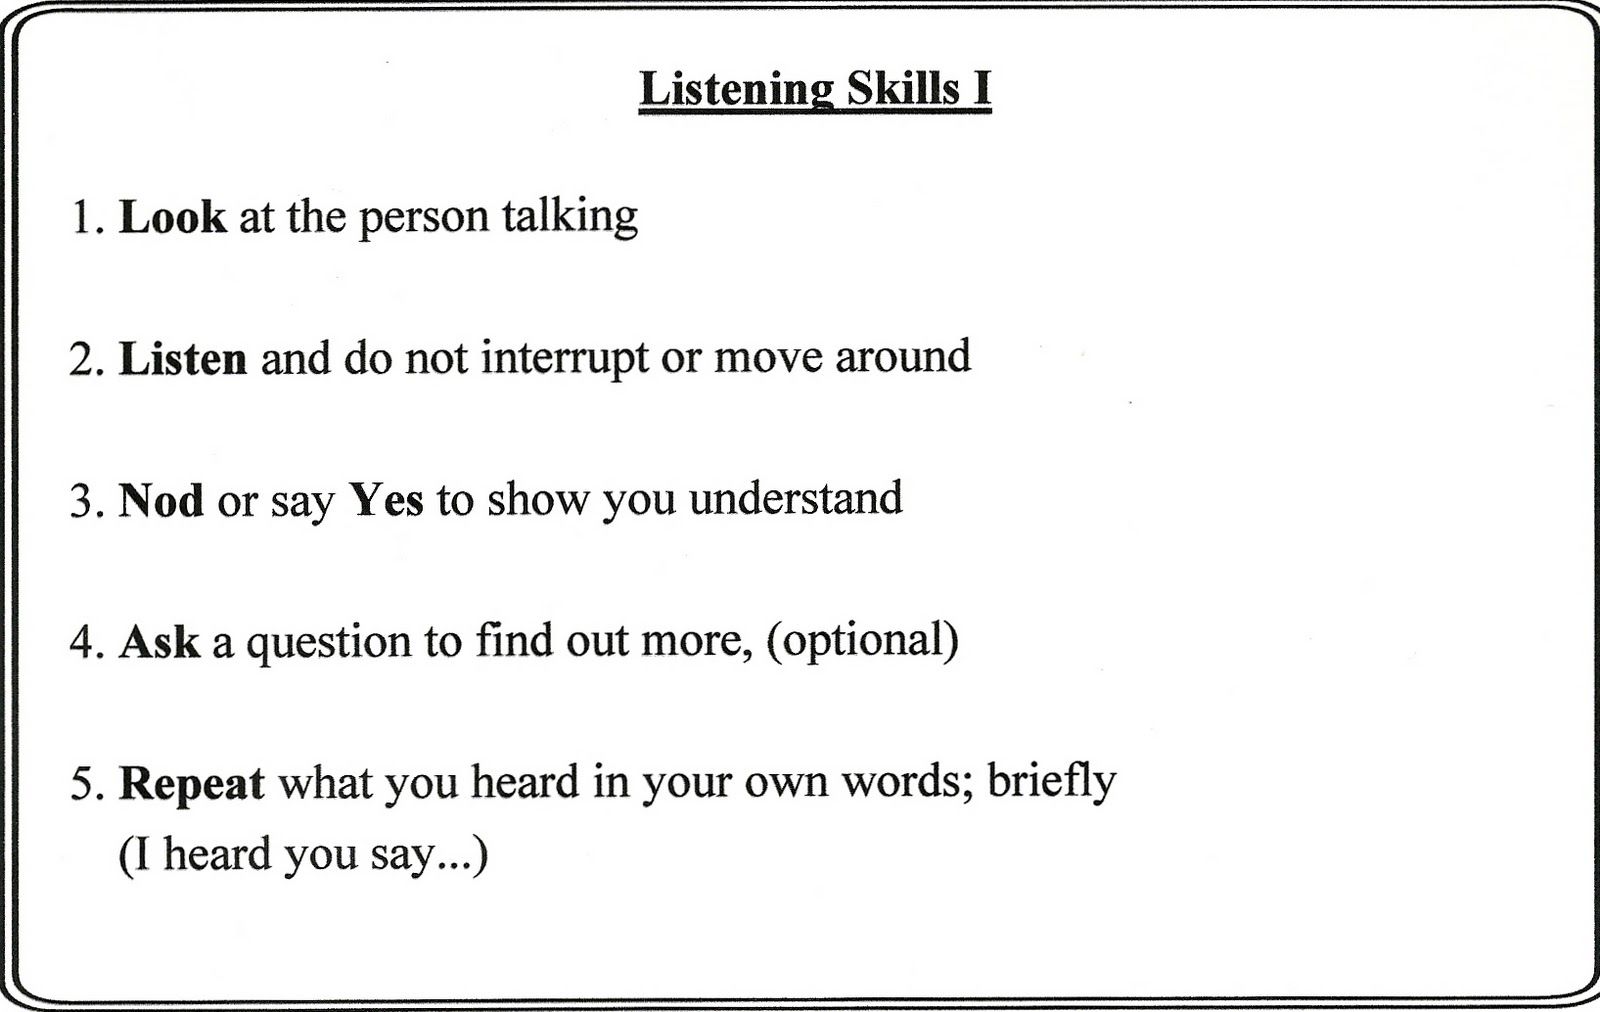 Active Listening Is Very Important When Trying To Resolve Conflict